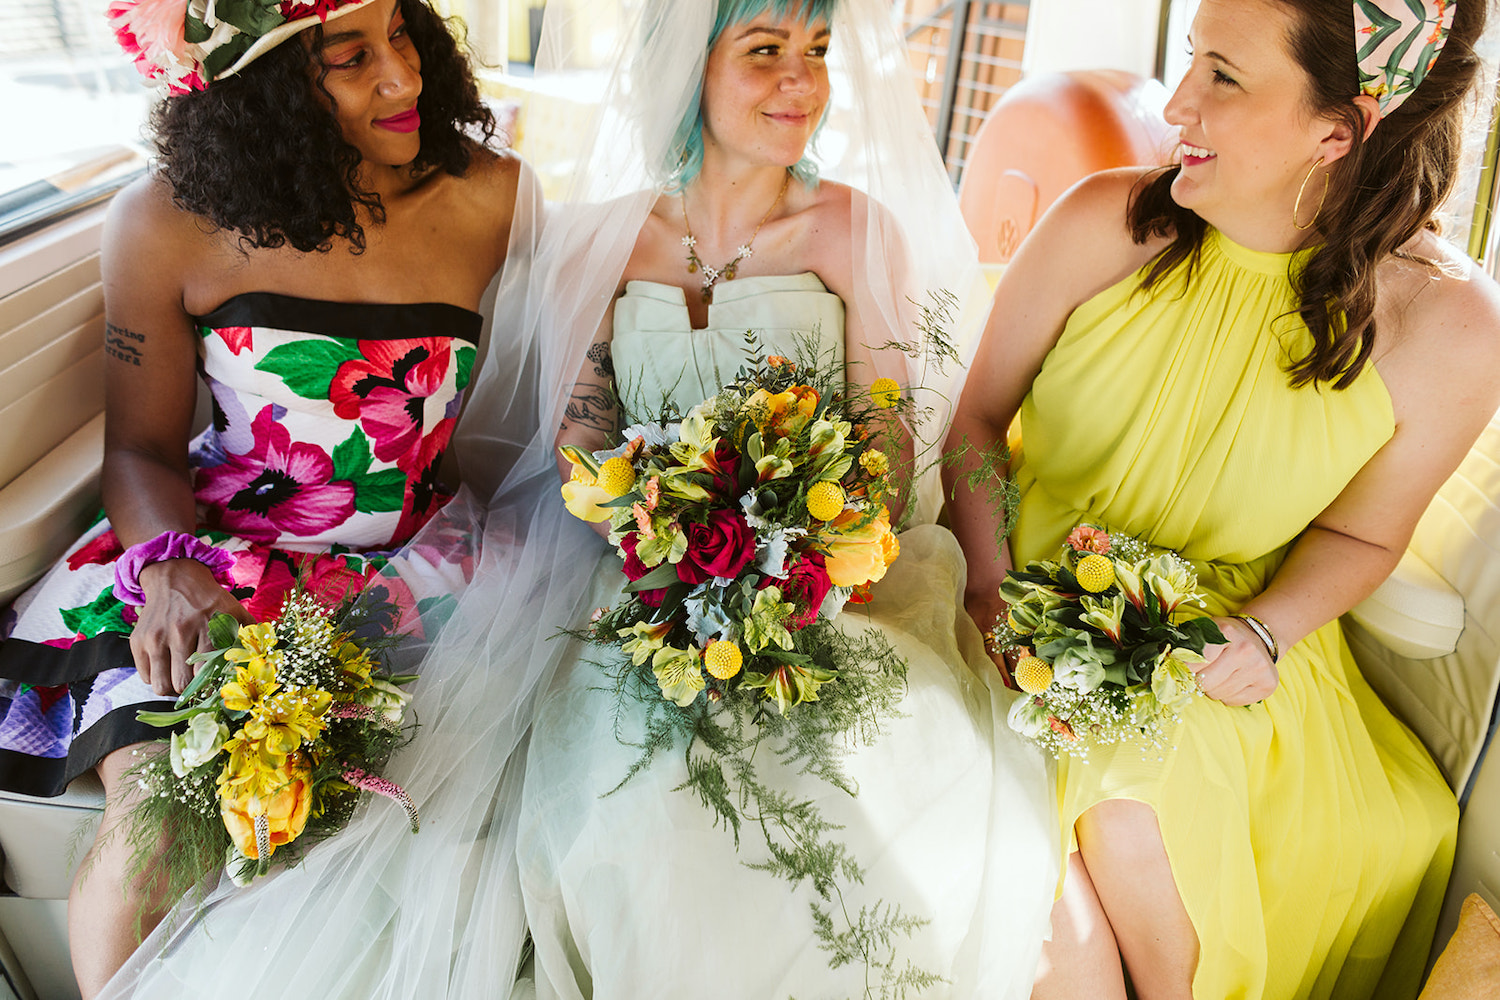 bride with colorful bouquet sits between two women in bright gowns in VW bus at Chattanooga lesbian wedding styled shoot